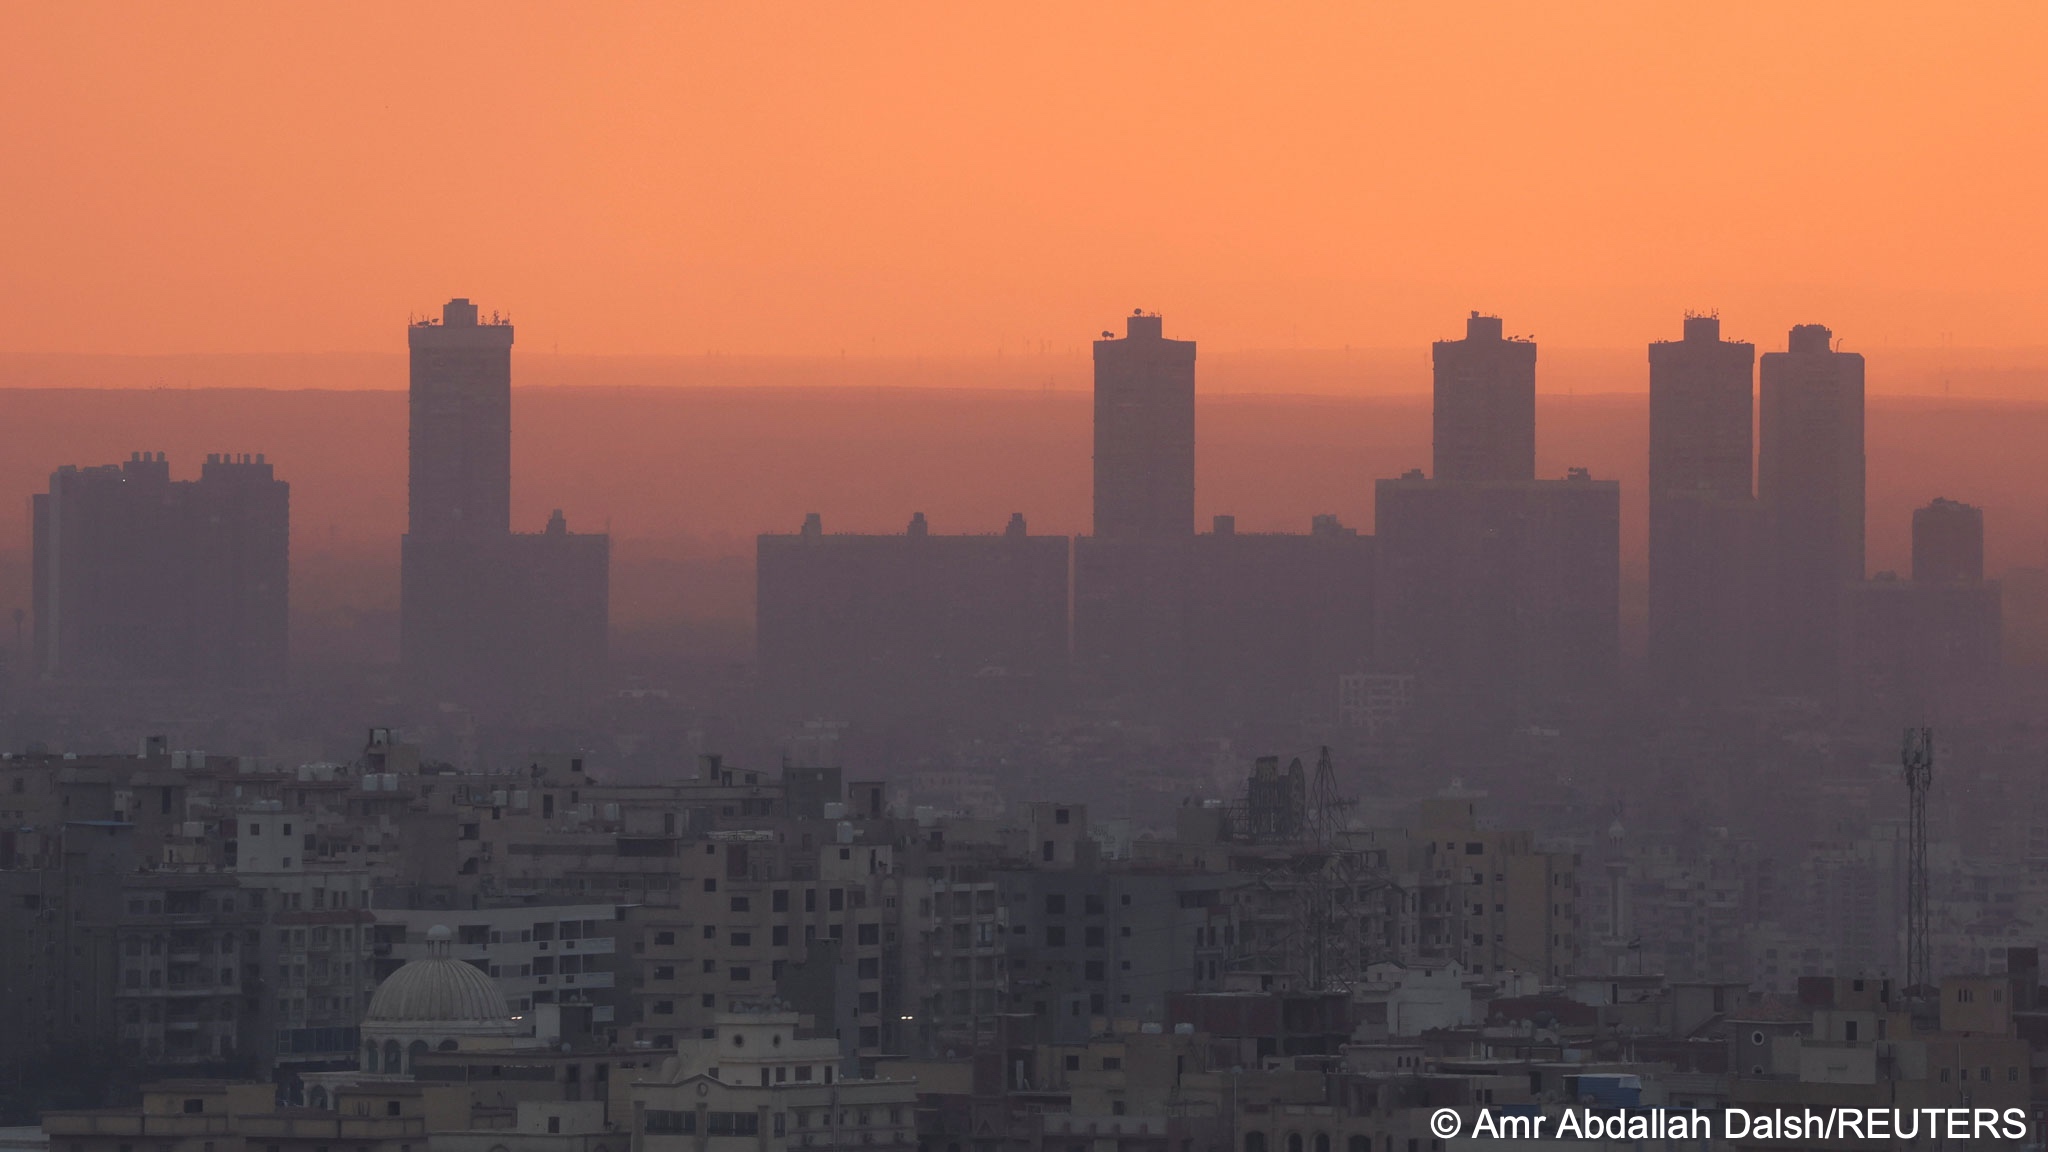 A general view of Cairo skyline during sunset, with foggy cold weather around the country, Cairo, Egypt, 2 February 2023 (image: REUTERS/Amr Abdallah Dalsh)